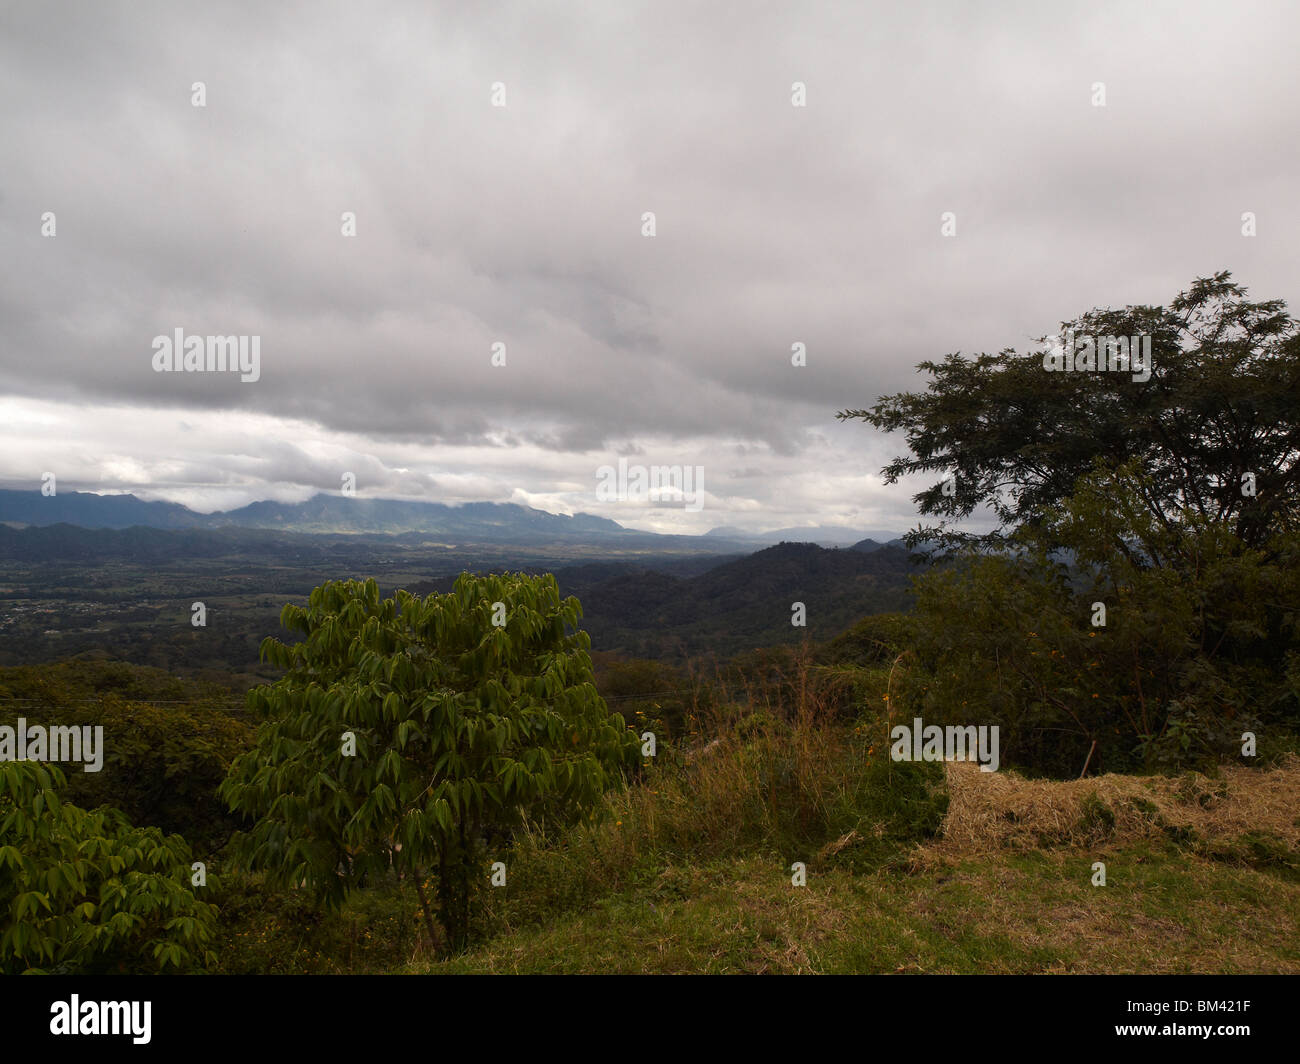 Landscape in Mexico with trees, valleys and mountain ridges under the stormy sky Stock Photo